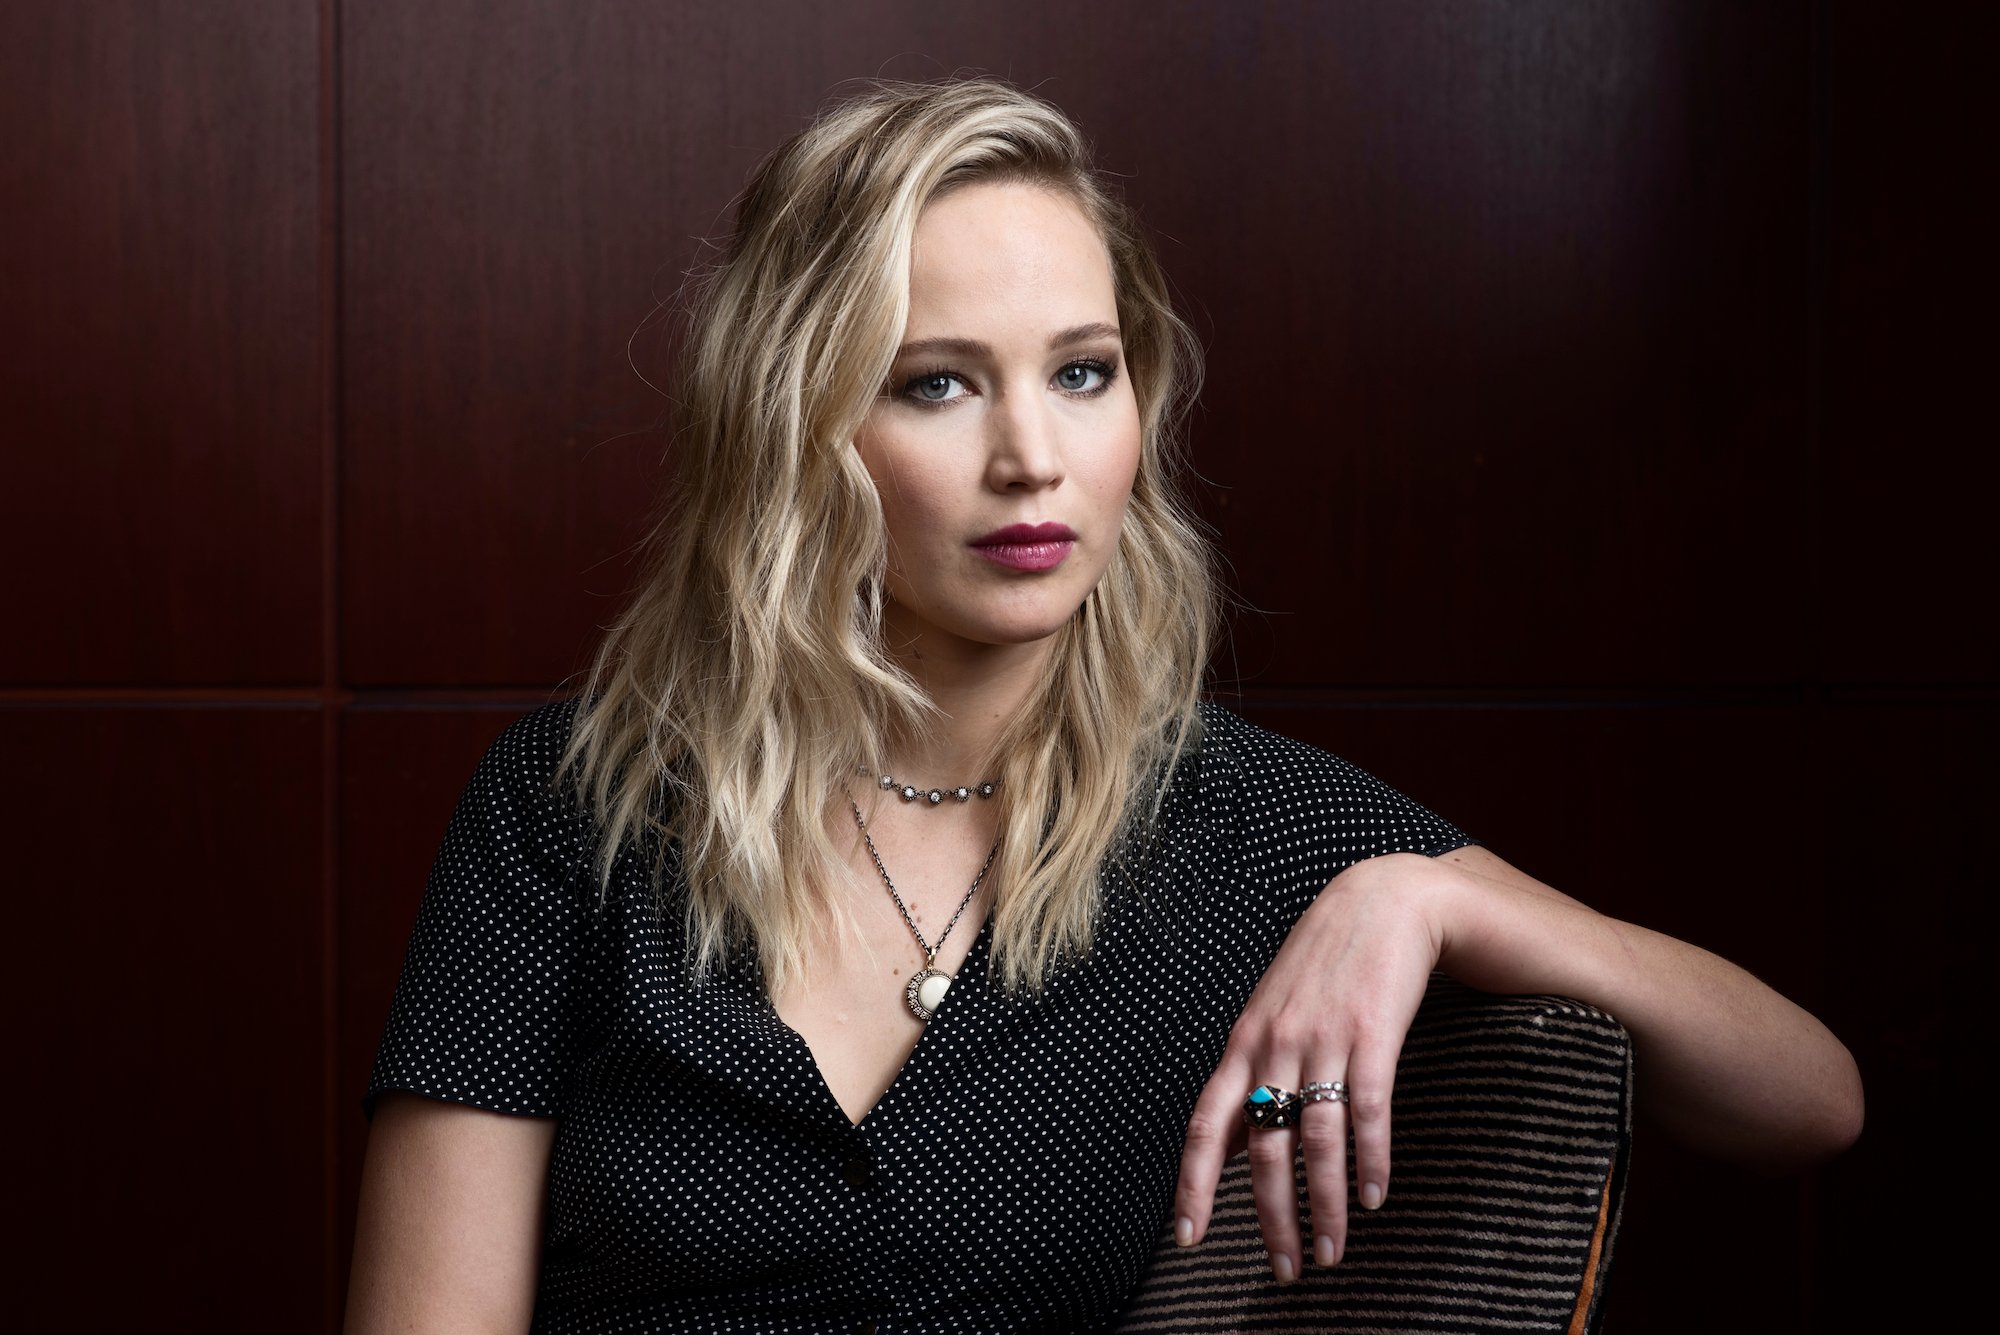 Jennifer Lawrence smiling in front of a wood paneled wall